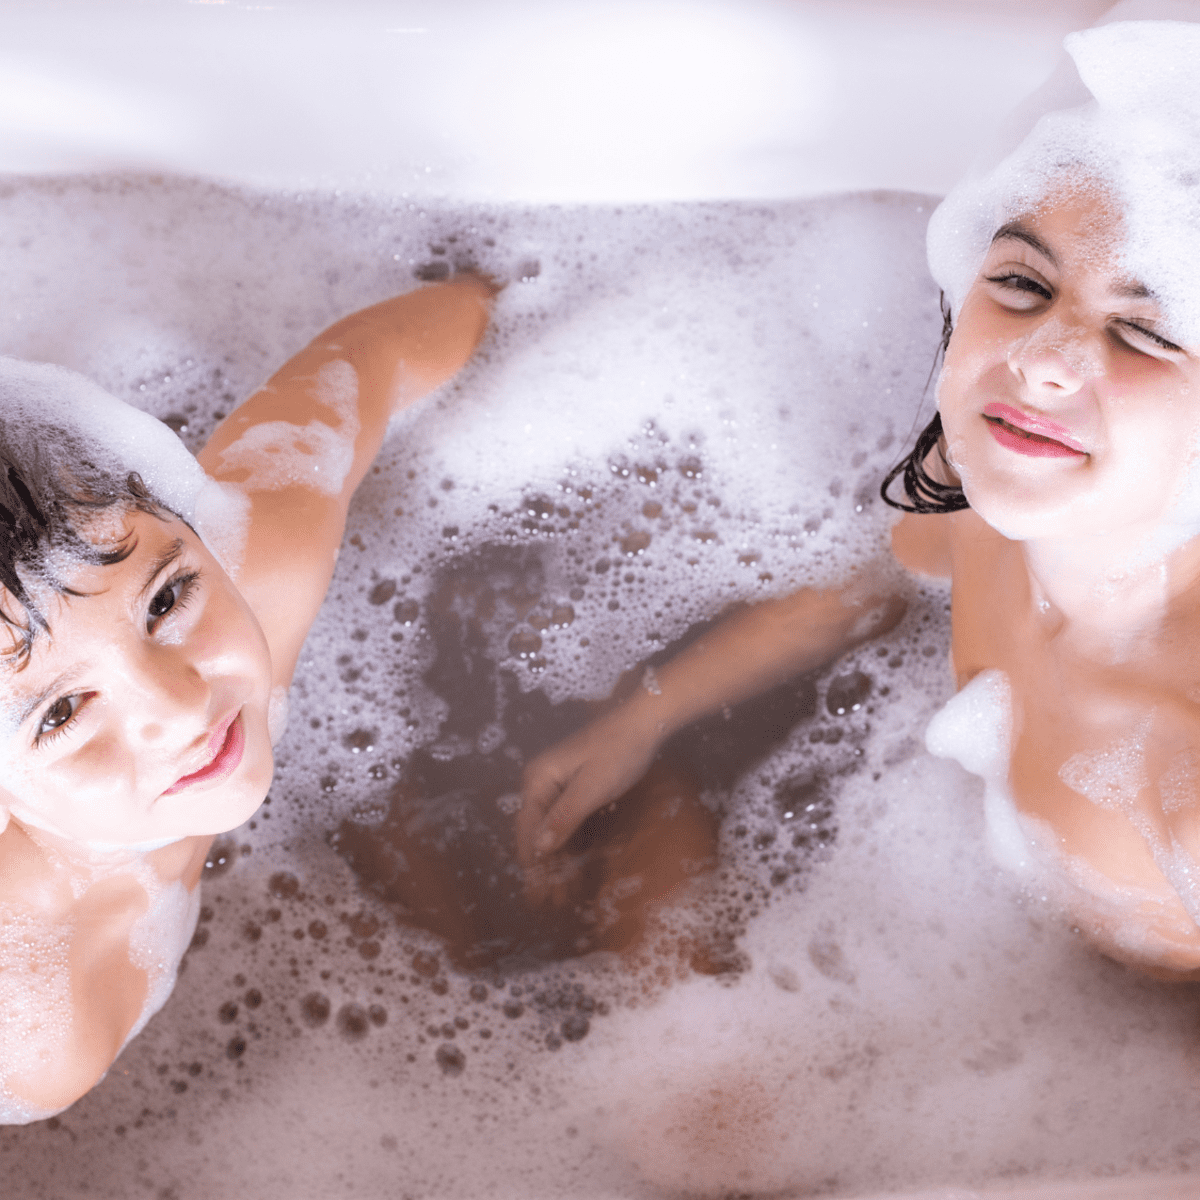 Parents Who Shower With Their Kids: Benefits and When to Stop